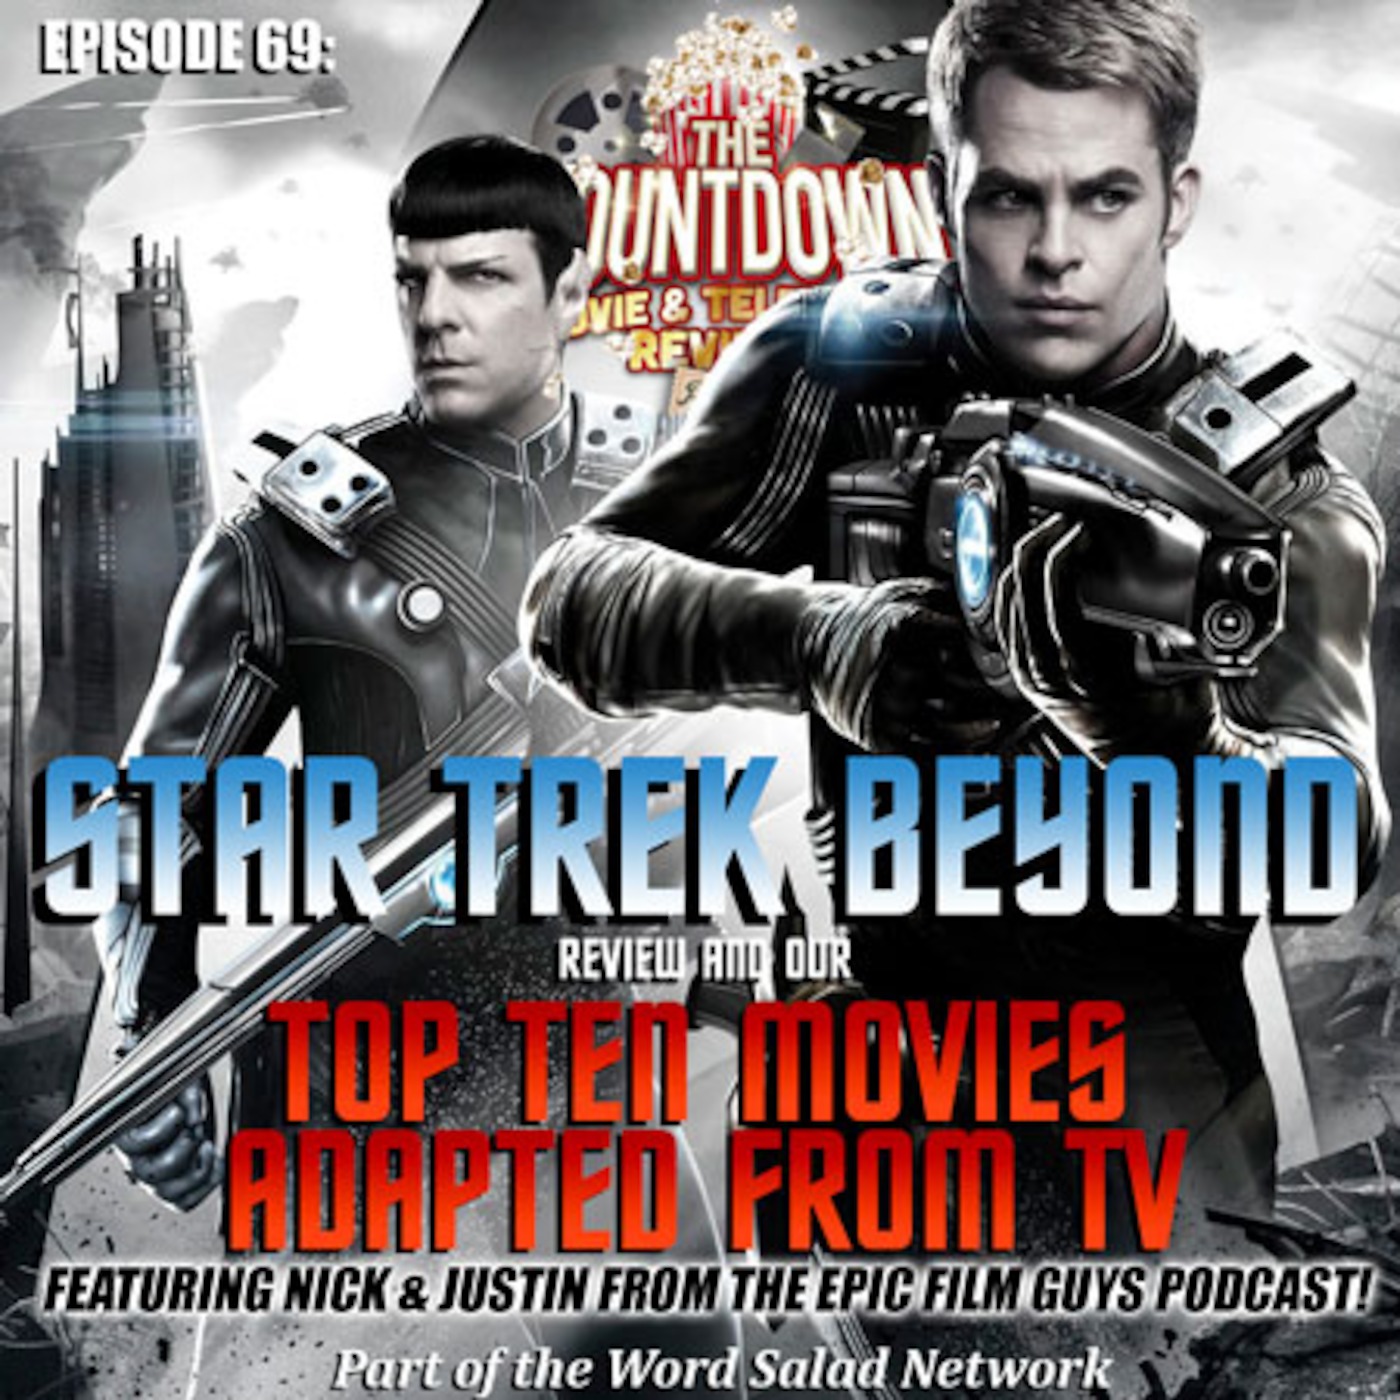 Episode 69: Top 10 Movies Adapted From TV / Star Trek Beyond (w/ The Epic Film Guys)